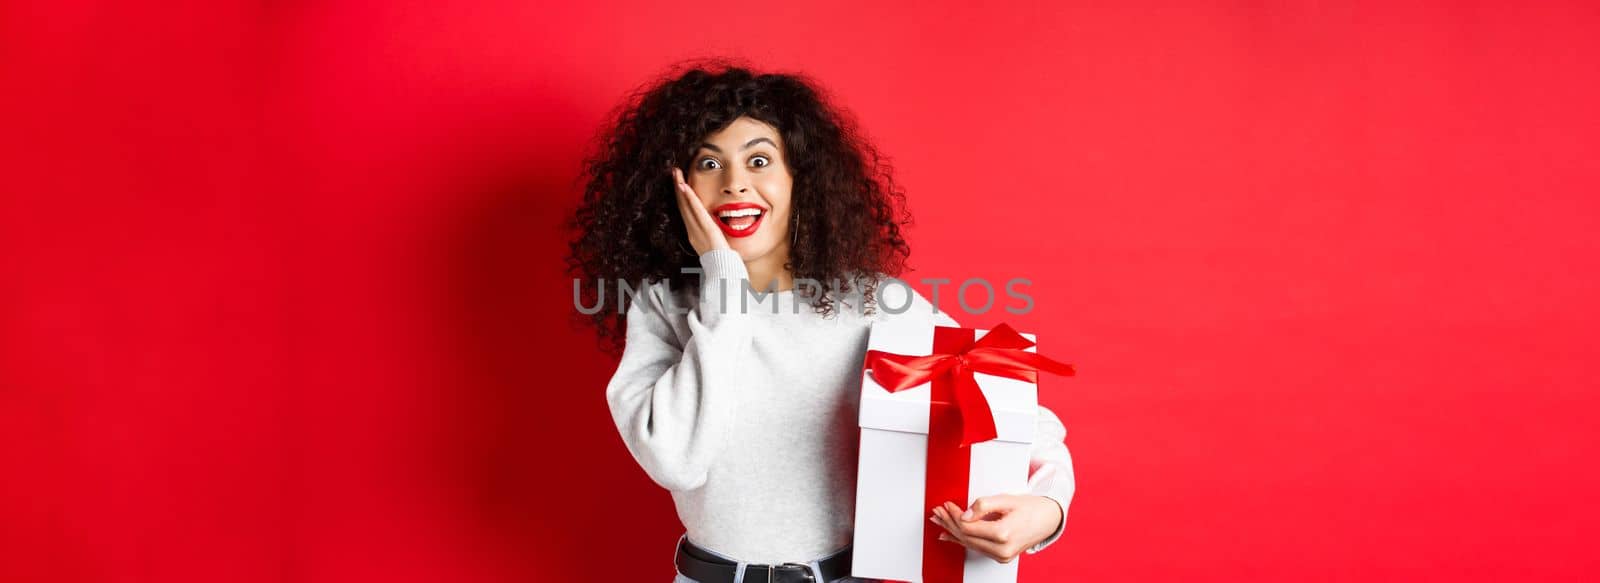 Surprised pretty girl receive Valentines day romantic gift, holding present box and looking with disbelief and happiness at camera, standing on red background.